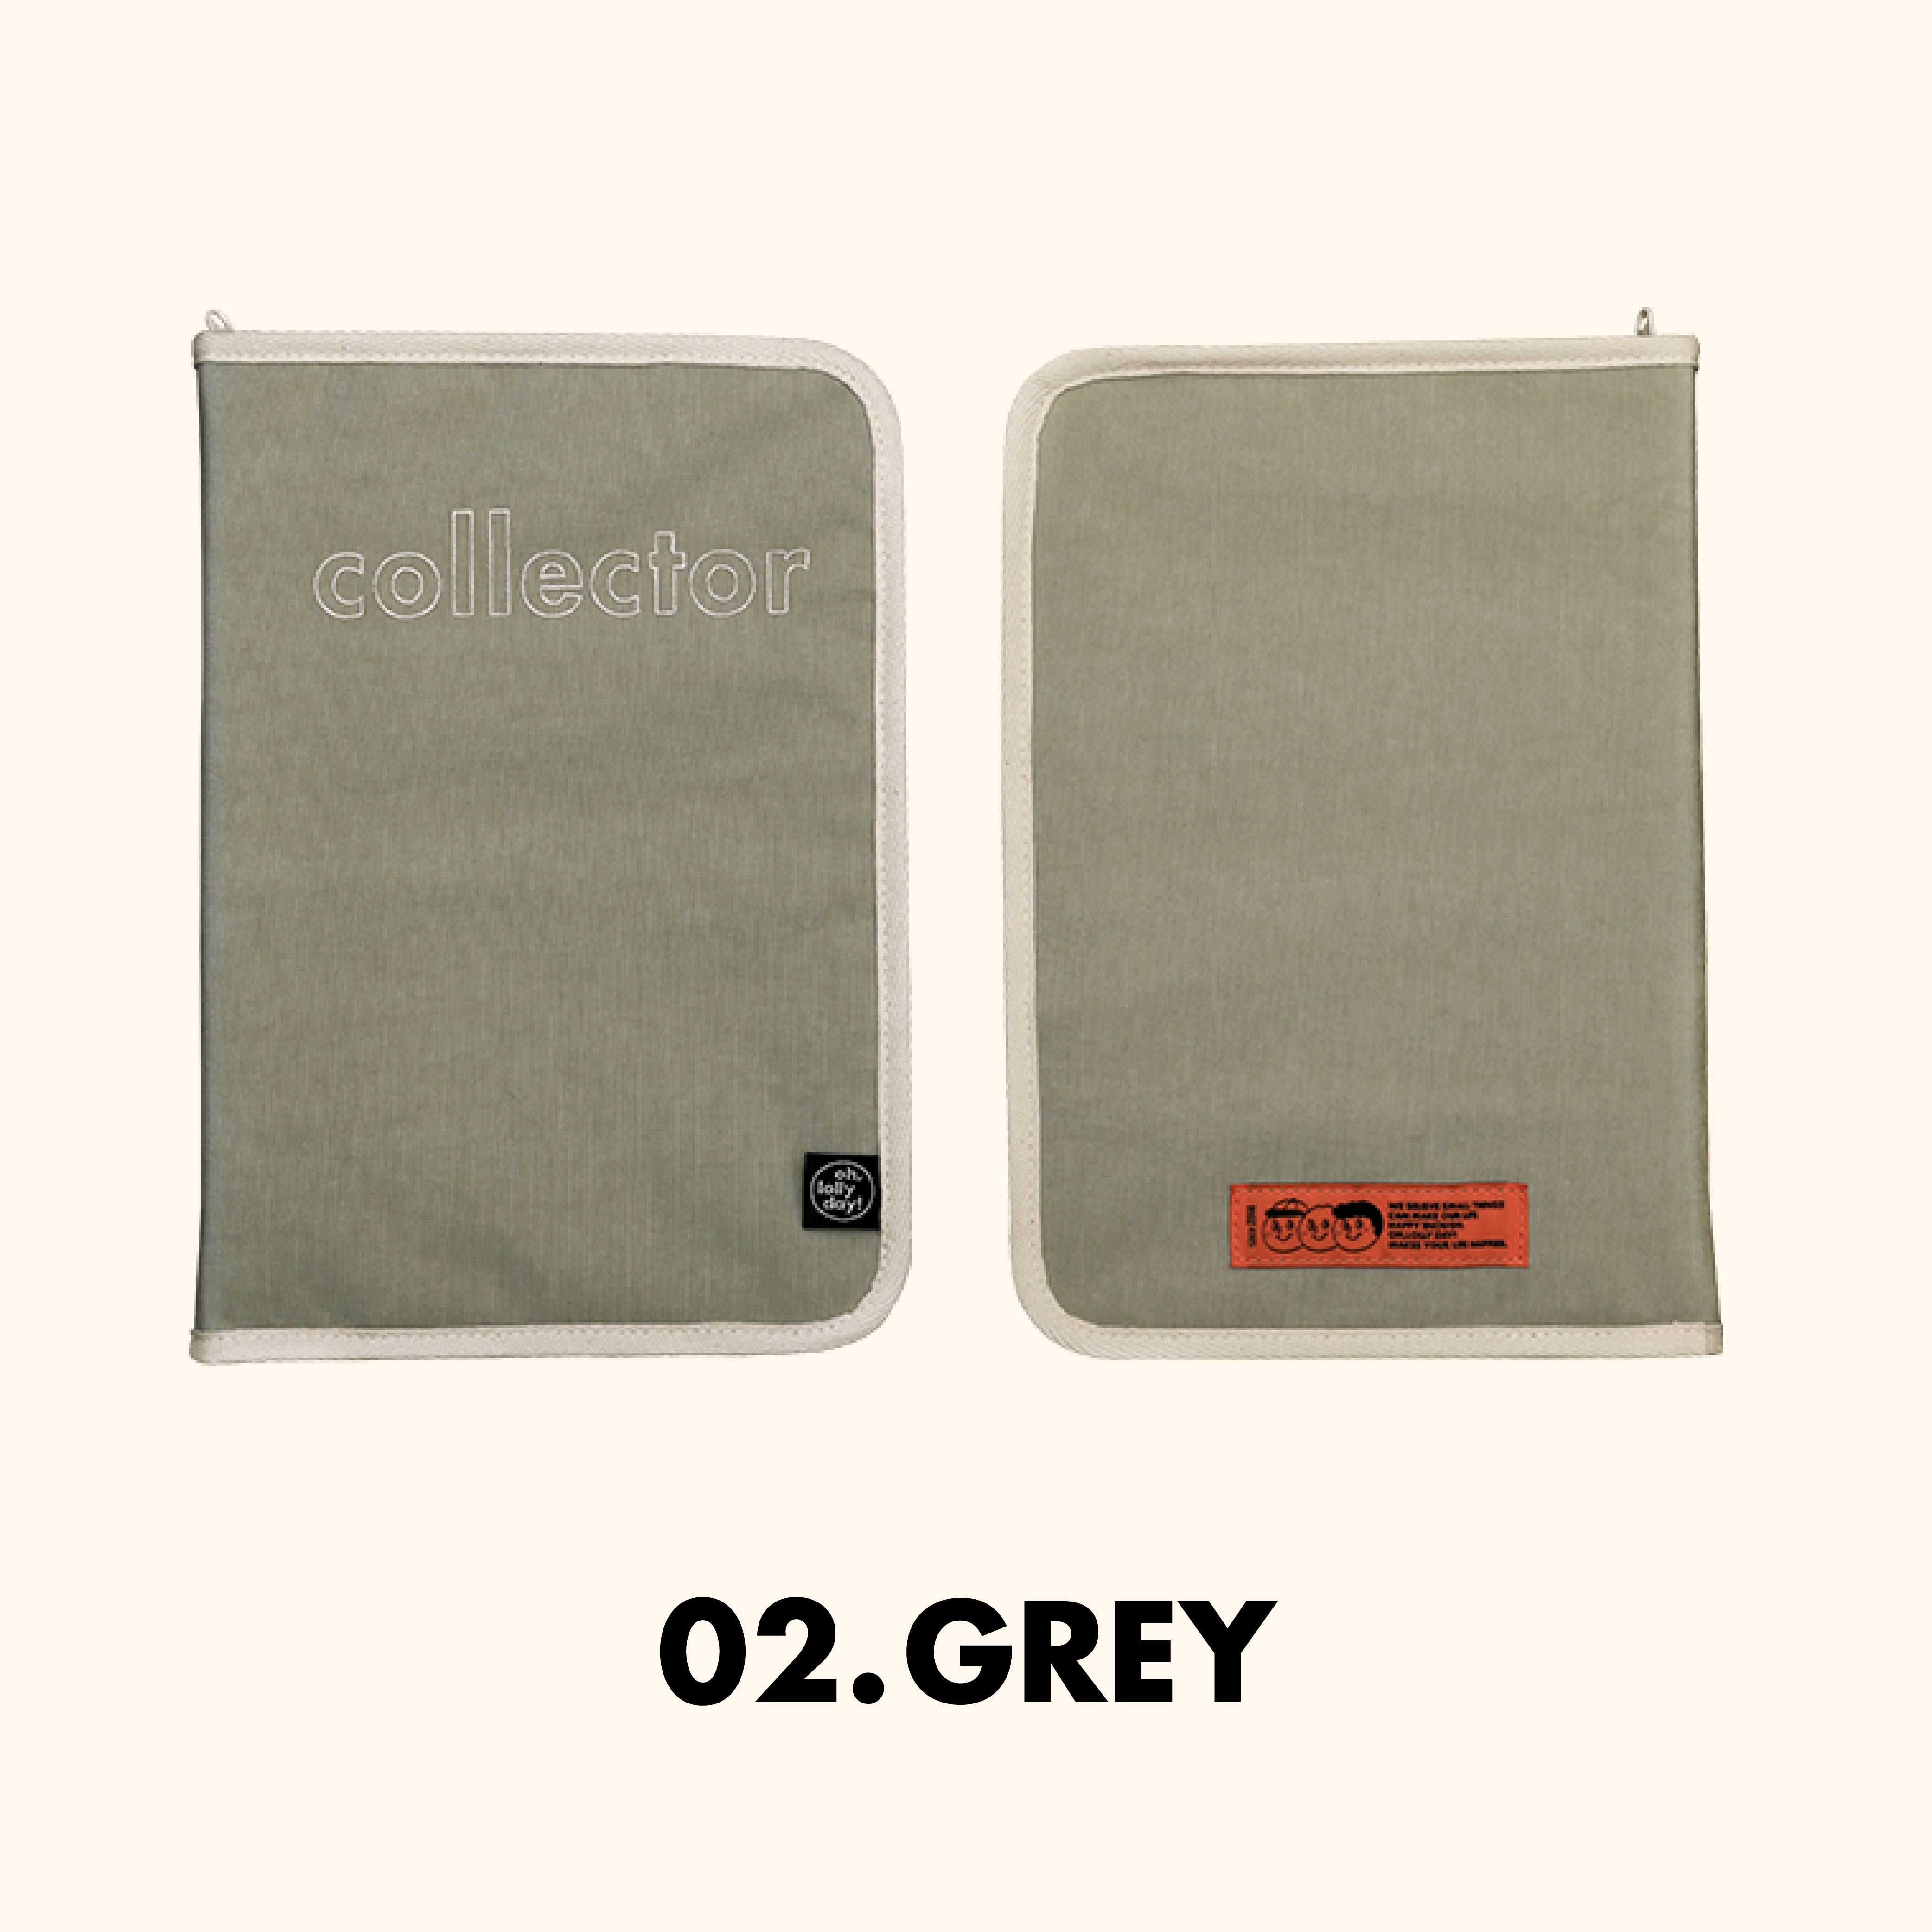 [Pouch] O,LD! Collector book pouch